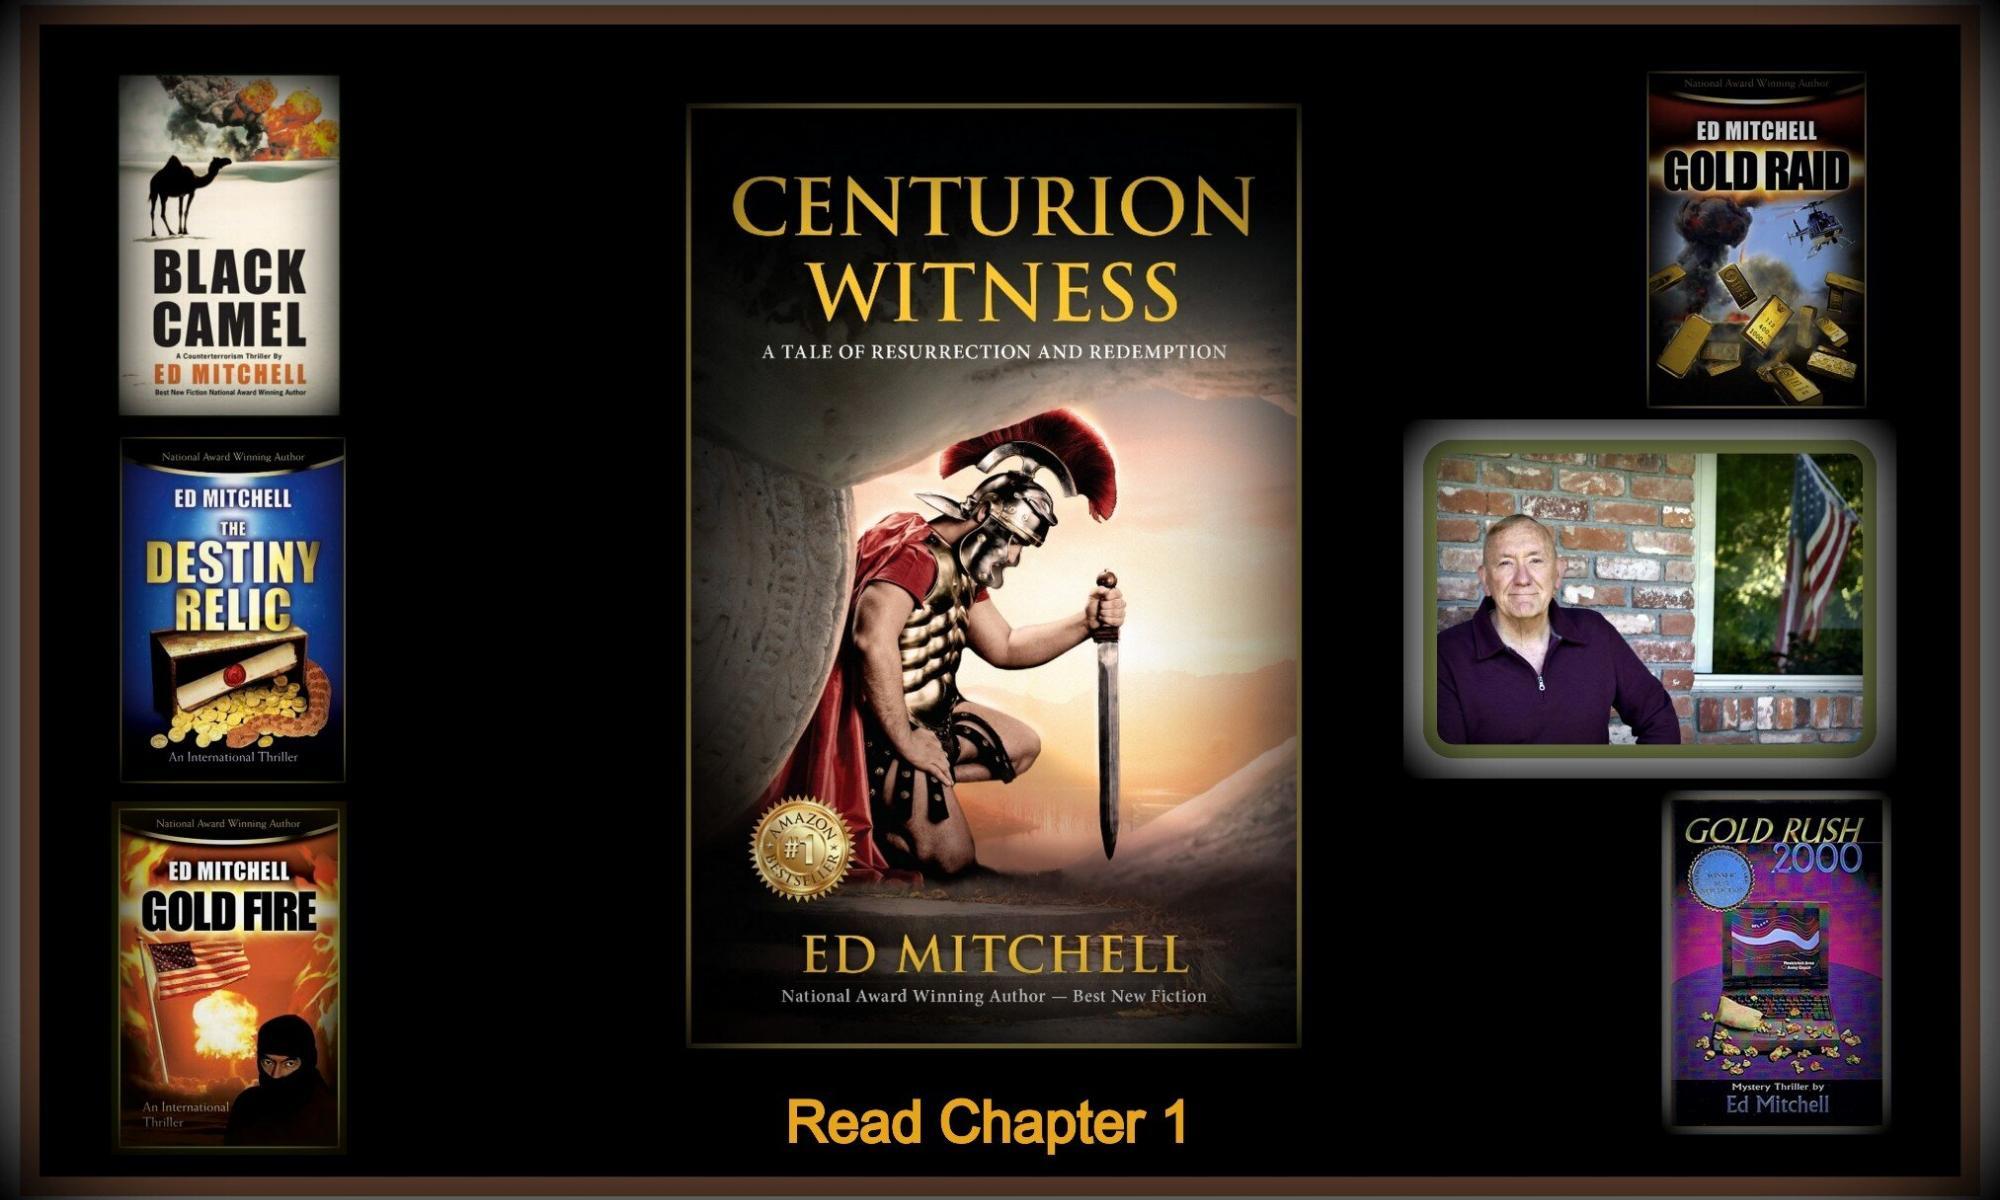 The book Centurion Witness is surrounded by other publications and its author Ed Mitchell